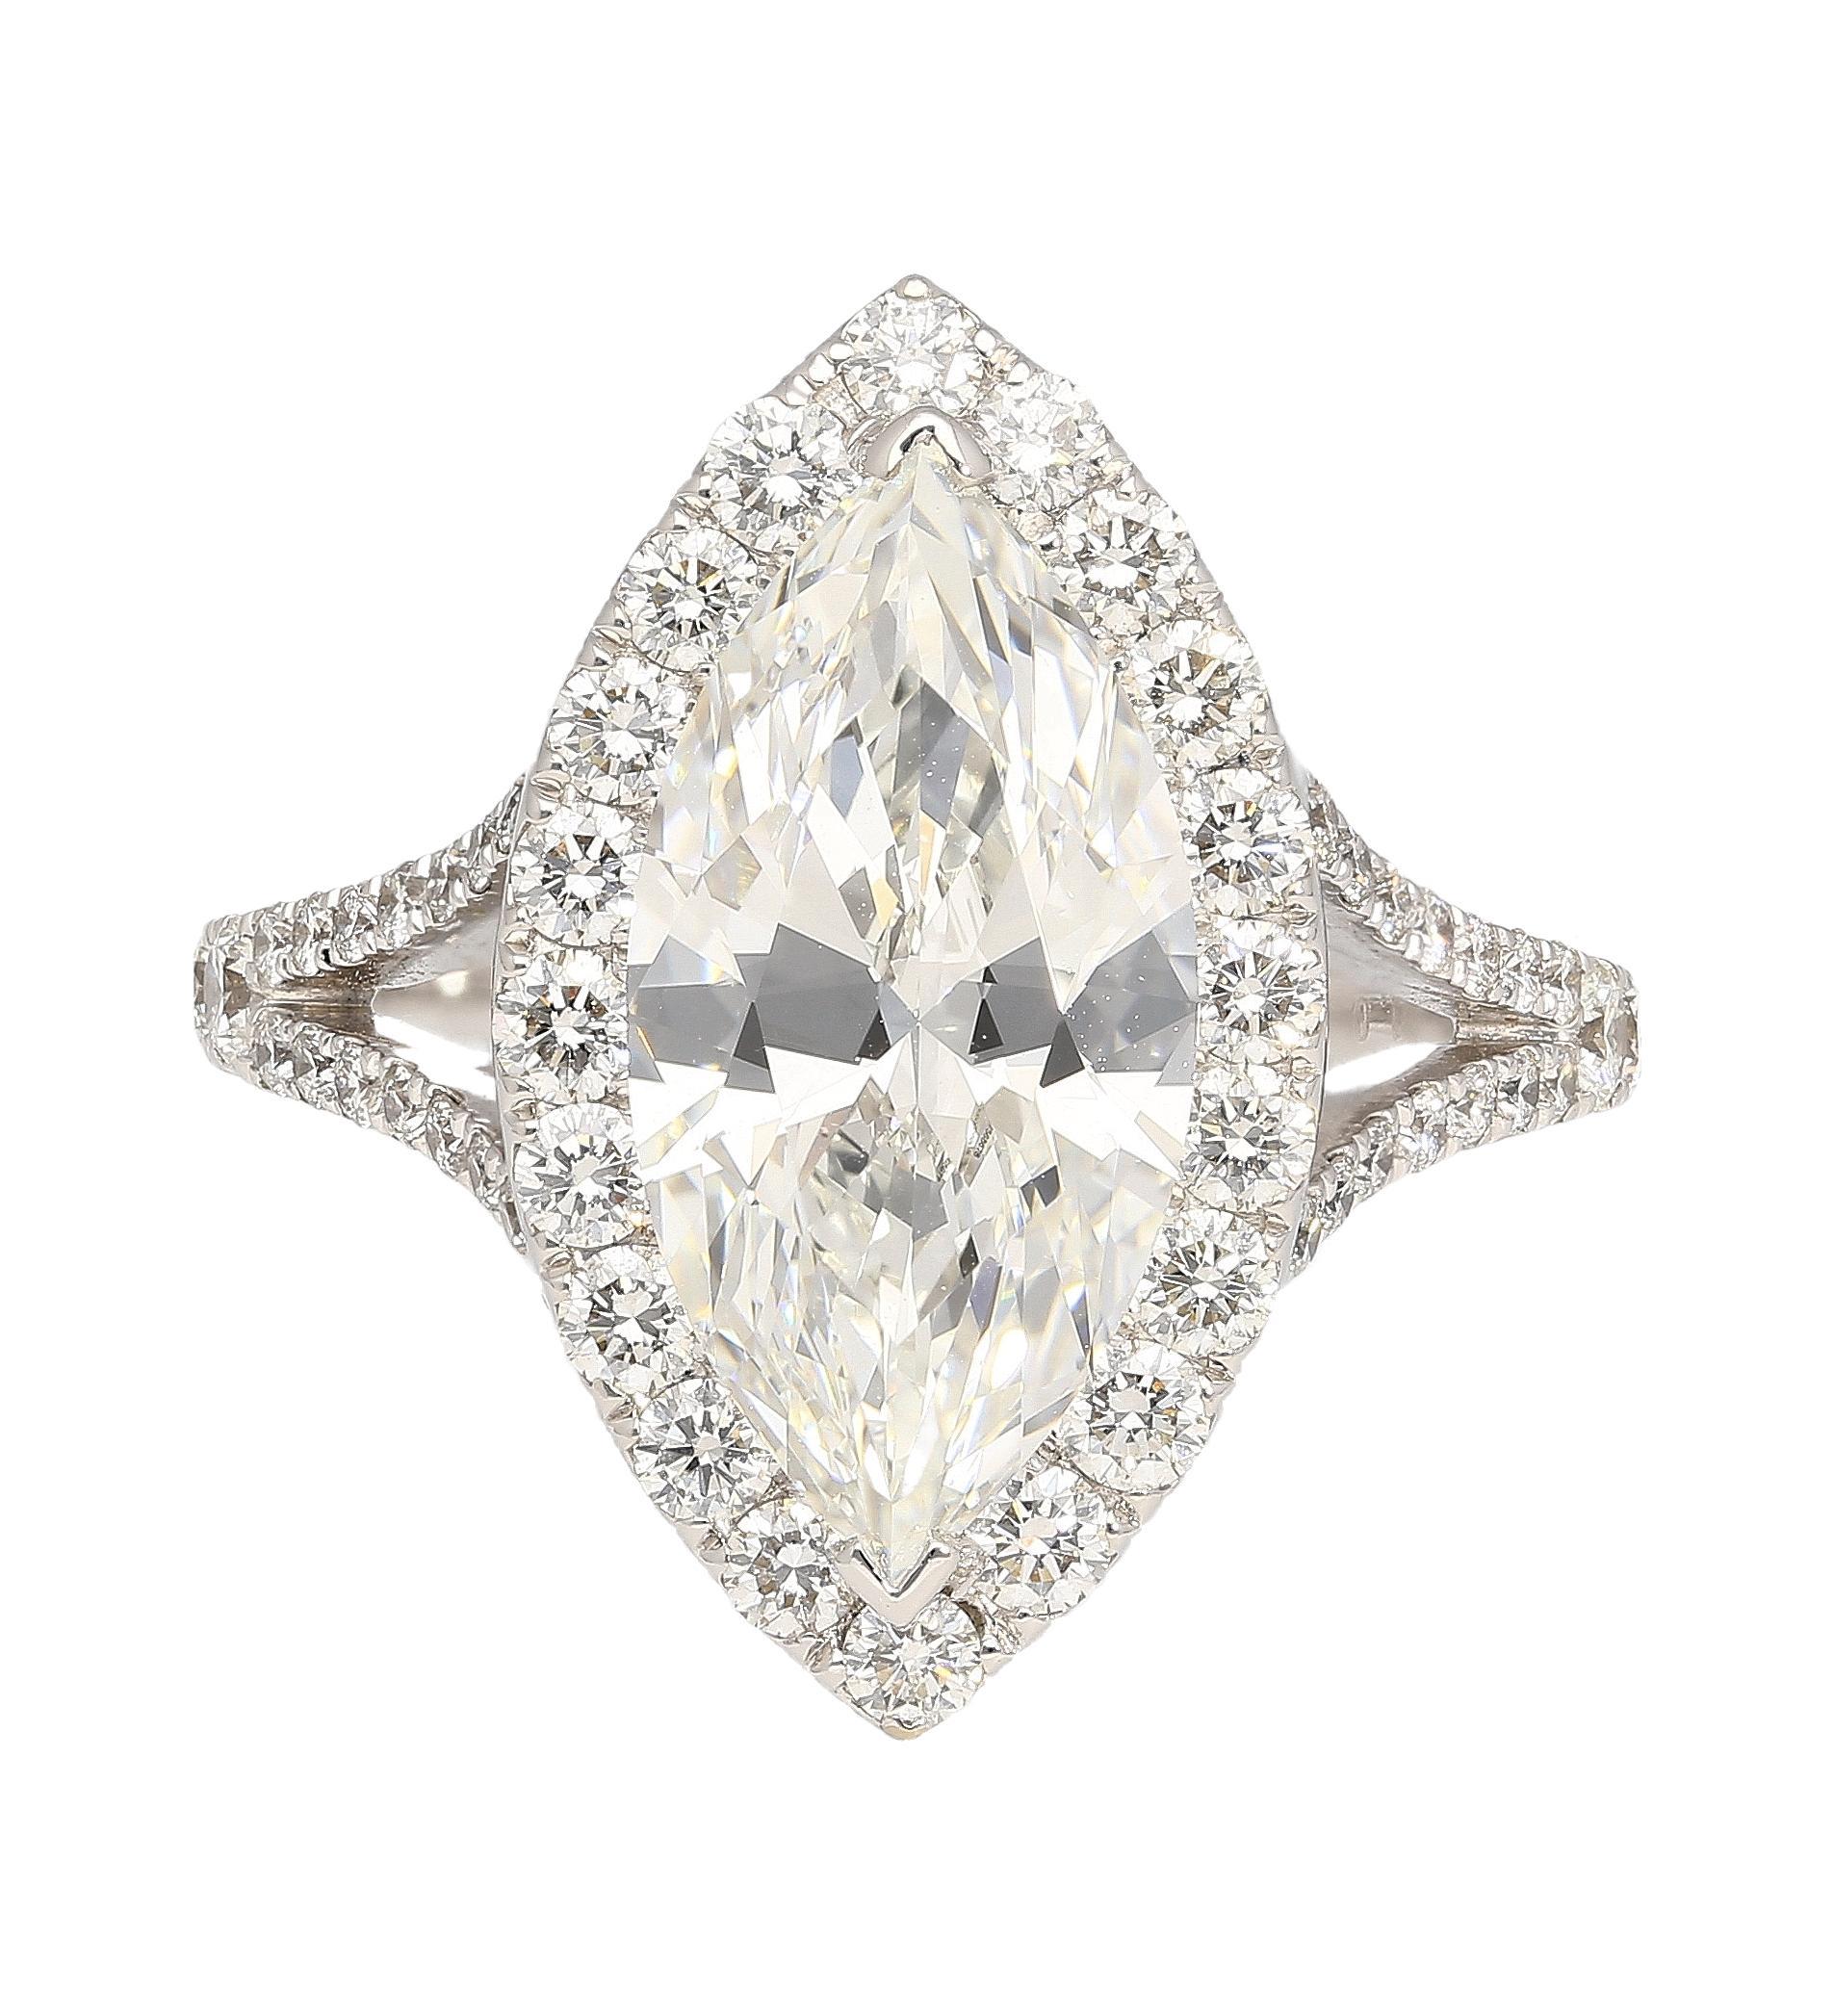 Jewelry Details:
Item Type: Diamond Ring
Metal Type: 18K White Gold
Weight: 4.25 grams
Gold Color: White
Ring Size: 6
Center Stone Details:
Gemstone Type: Diamond
Shape: Marquise
Carat: 3.22 Carats
Color: G
Clarity: VS1
Certification: GIA Certified